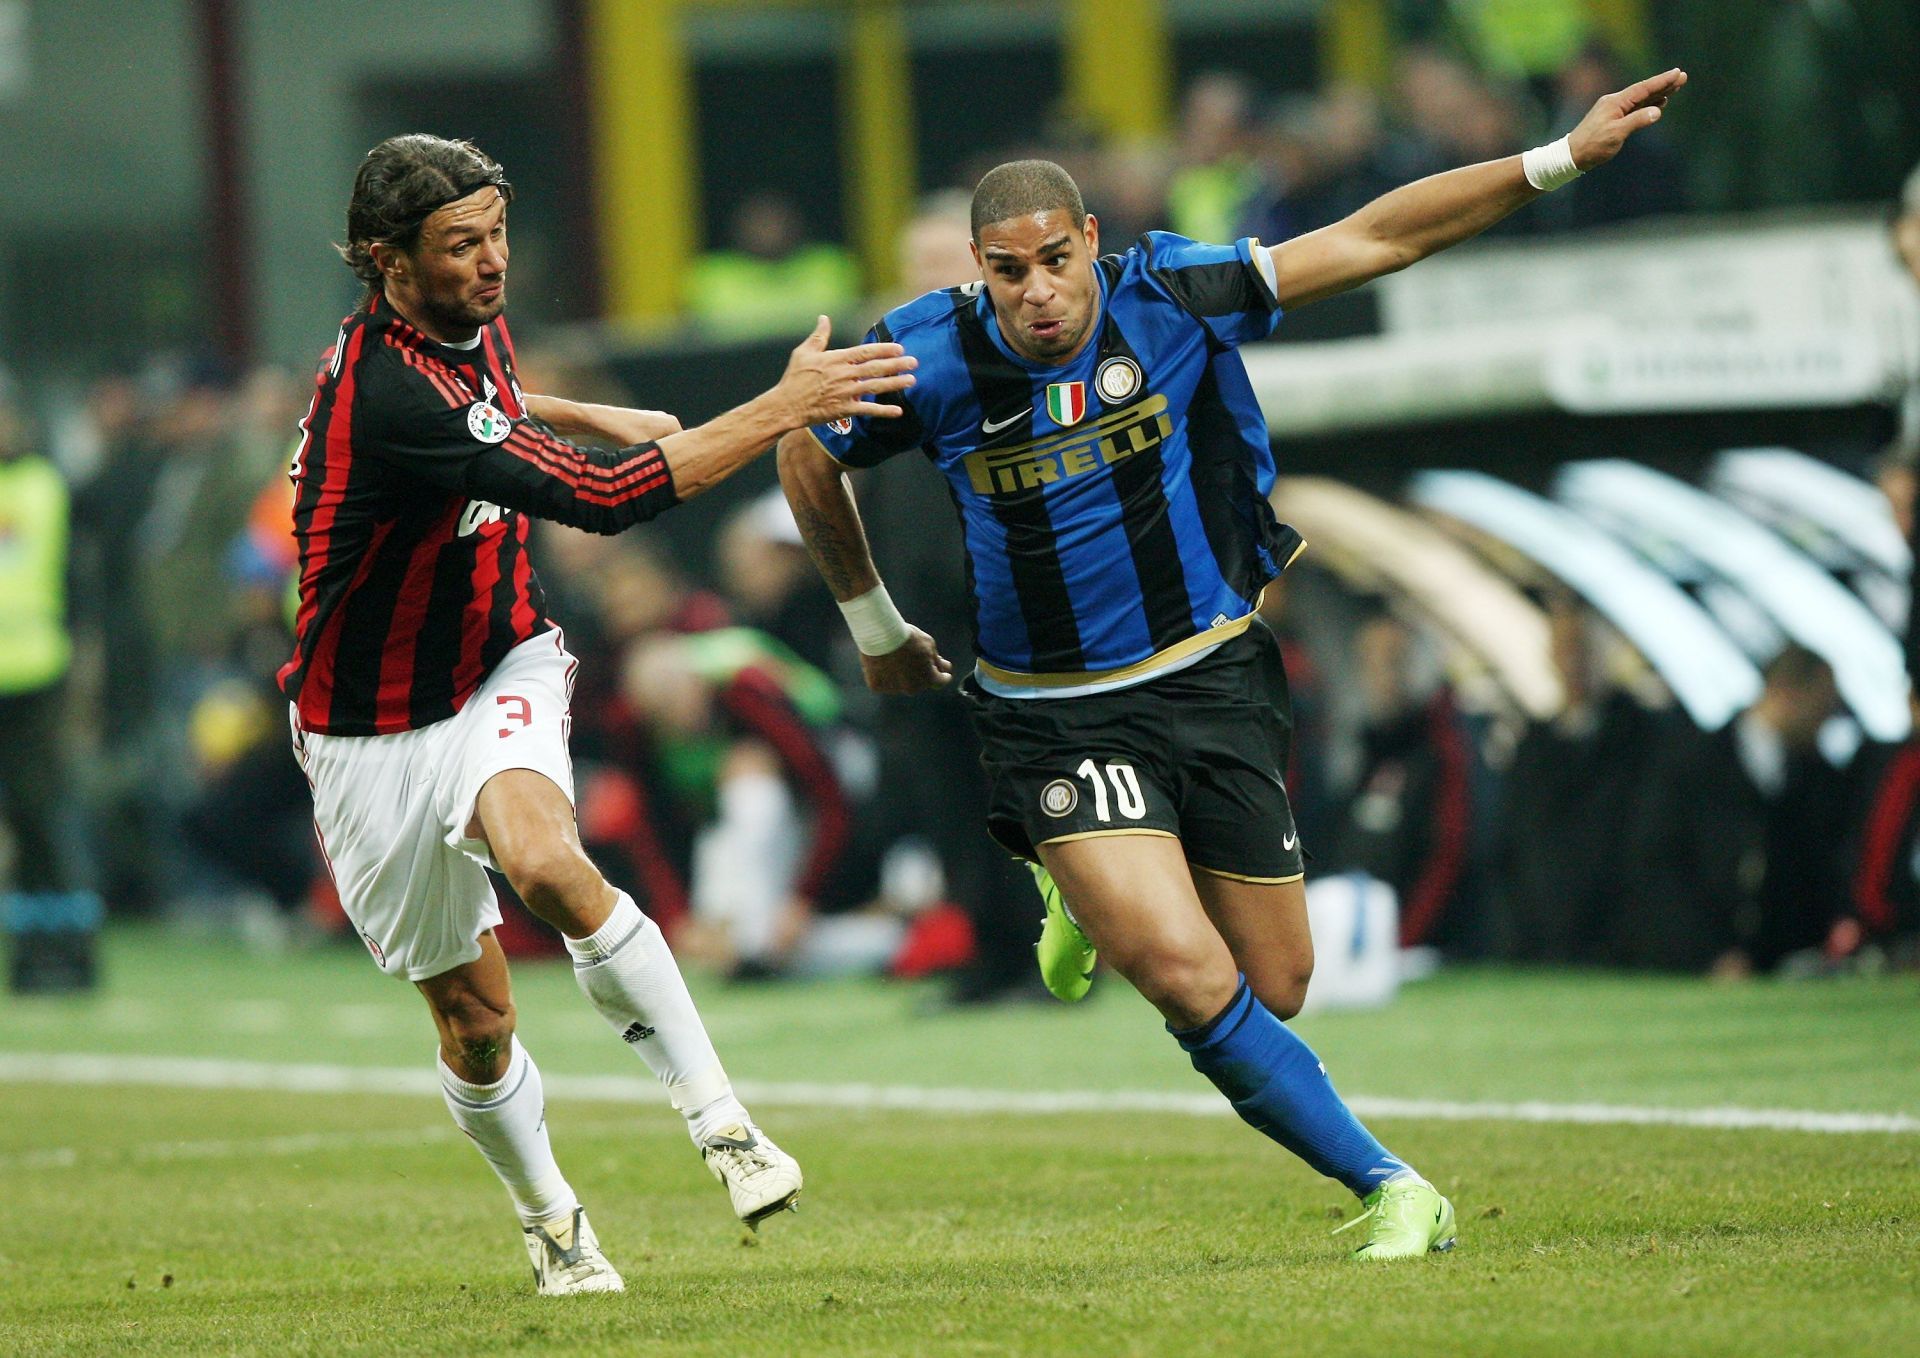 Adriano and Maldini during Milan derby.